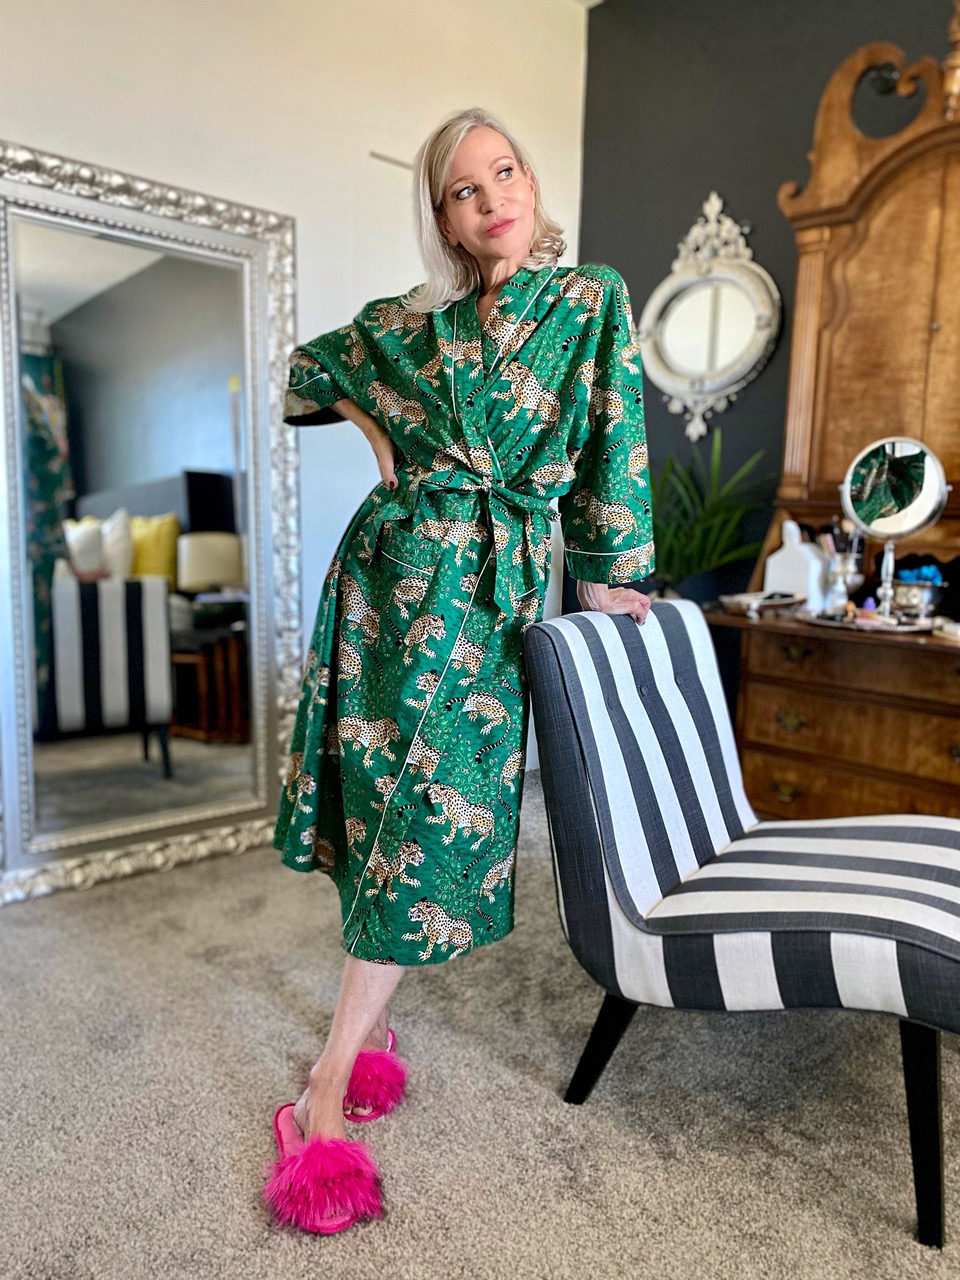 Lifestyle Influencer, Jamie Lewinger of More Than Turquoise, wearing Bagheera Flannel all-gender robe from Printfresh in Forest